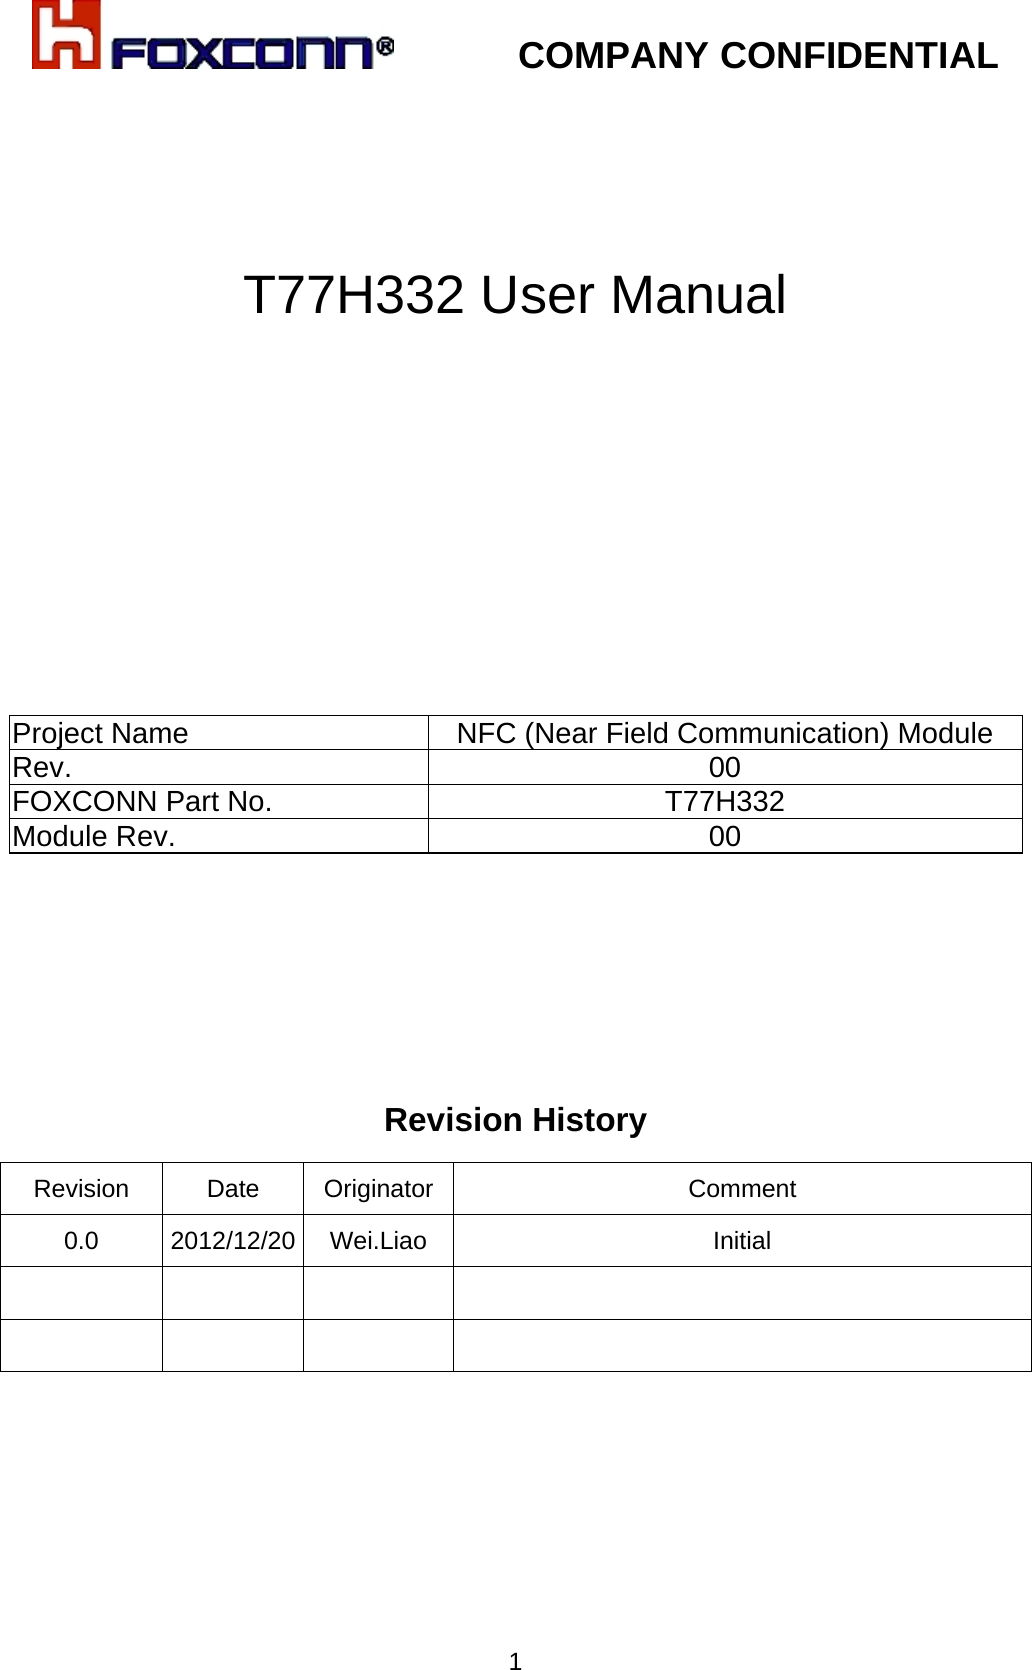            COMPANY CONFIDENTIAL   1   T77H332 User Manual           Project Name NFC (Near Field Communication) Module  Rev. 00 FOXCONN Part No. T77H332 Module Rev.  00       Revision History         Revision   Date  Originator  Comment 0.0 2012/12/20 Wei.Liao  Initial         